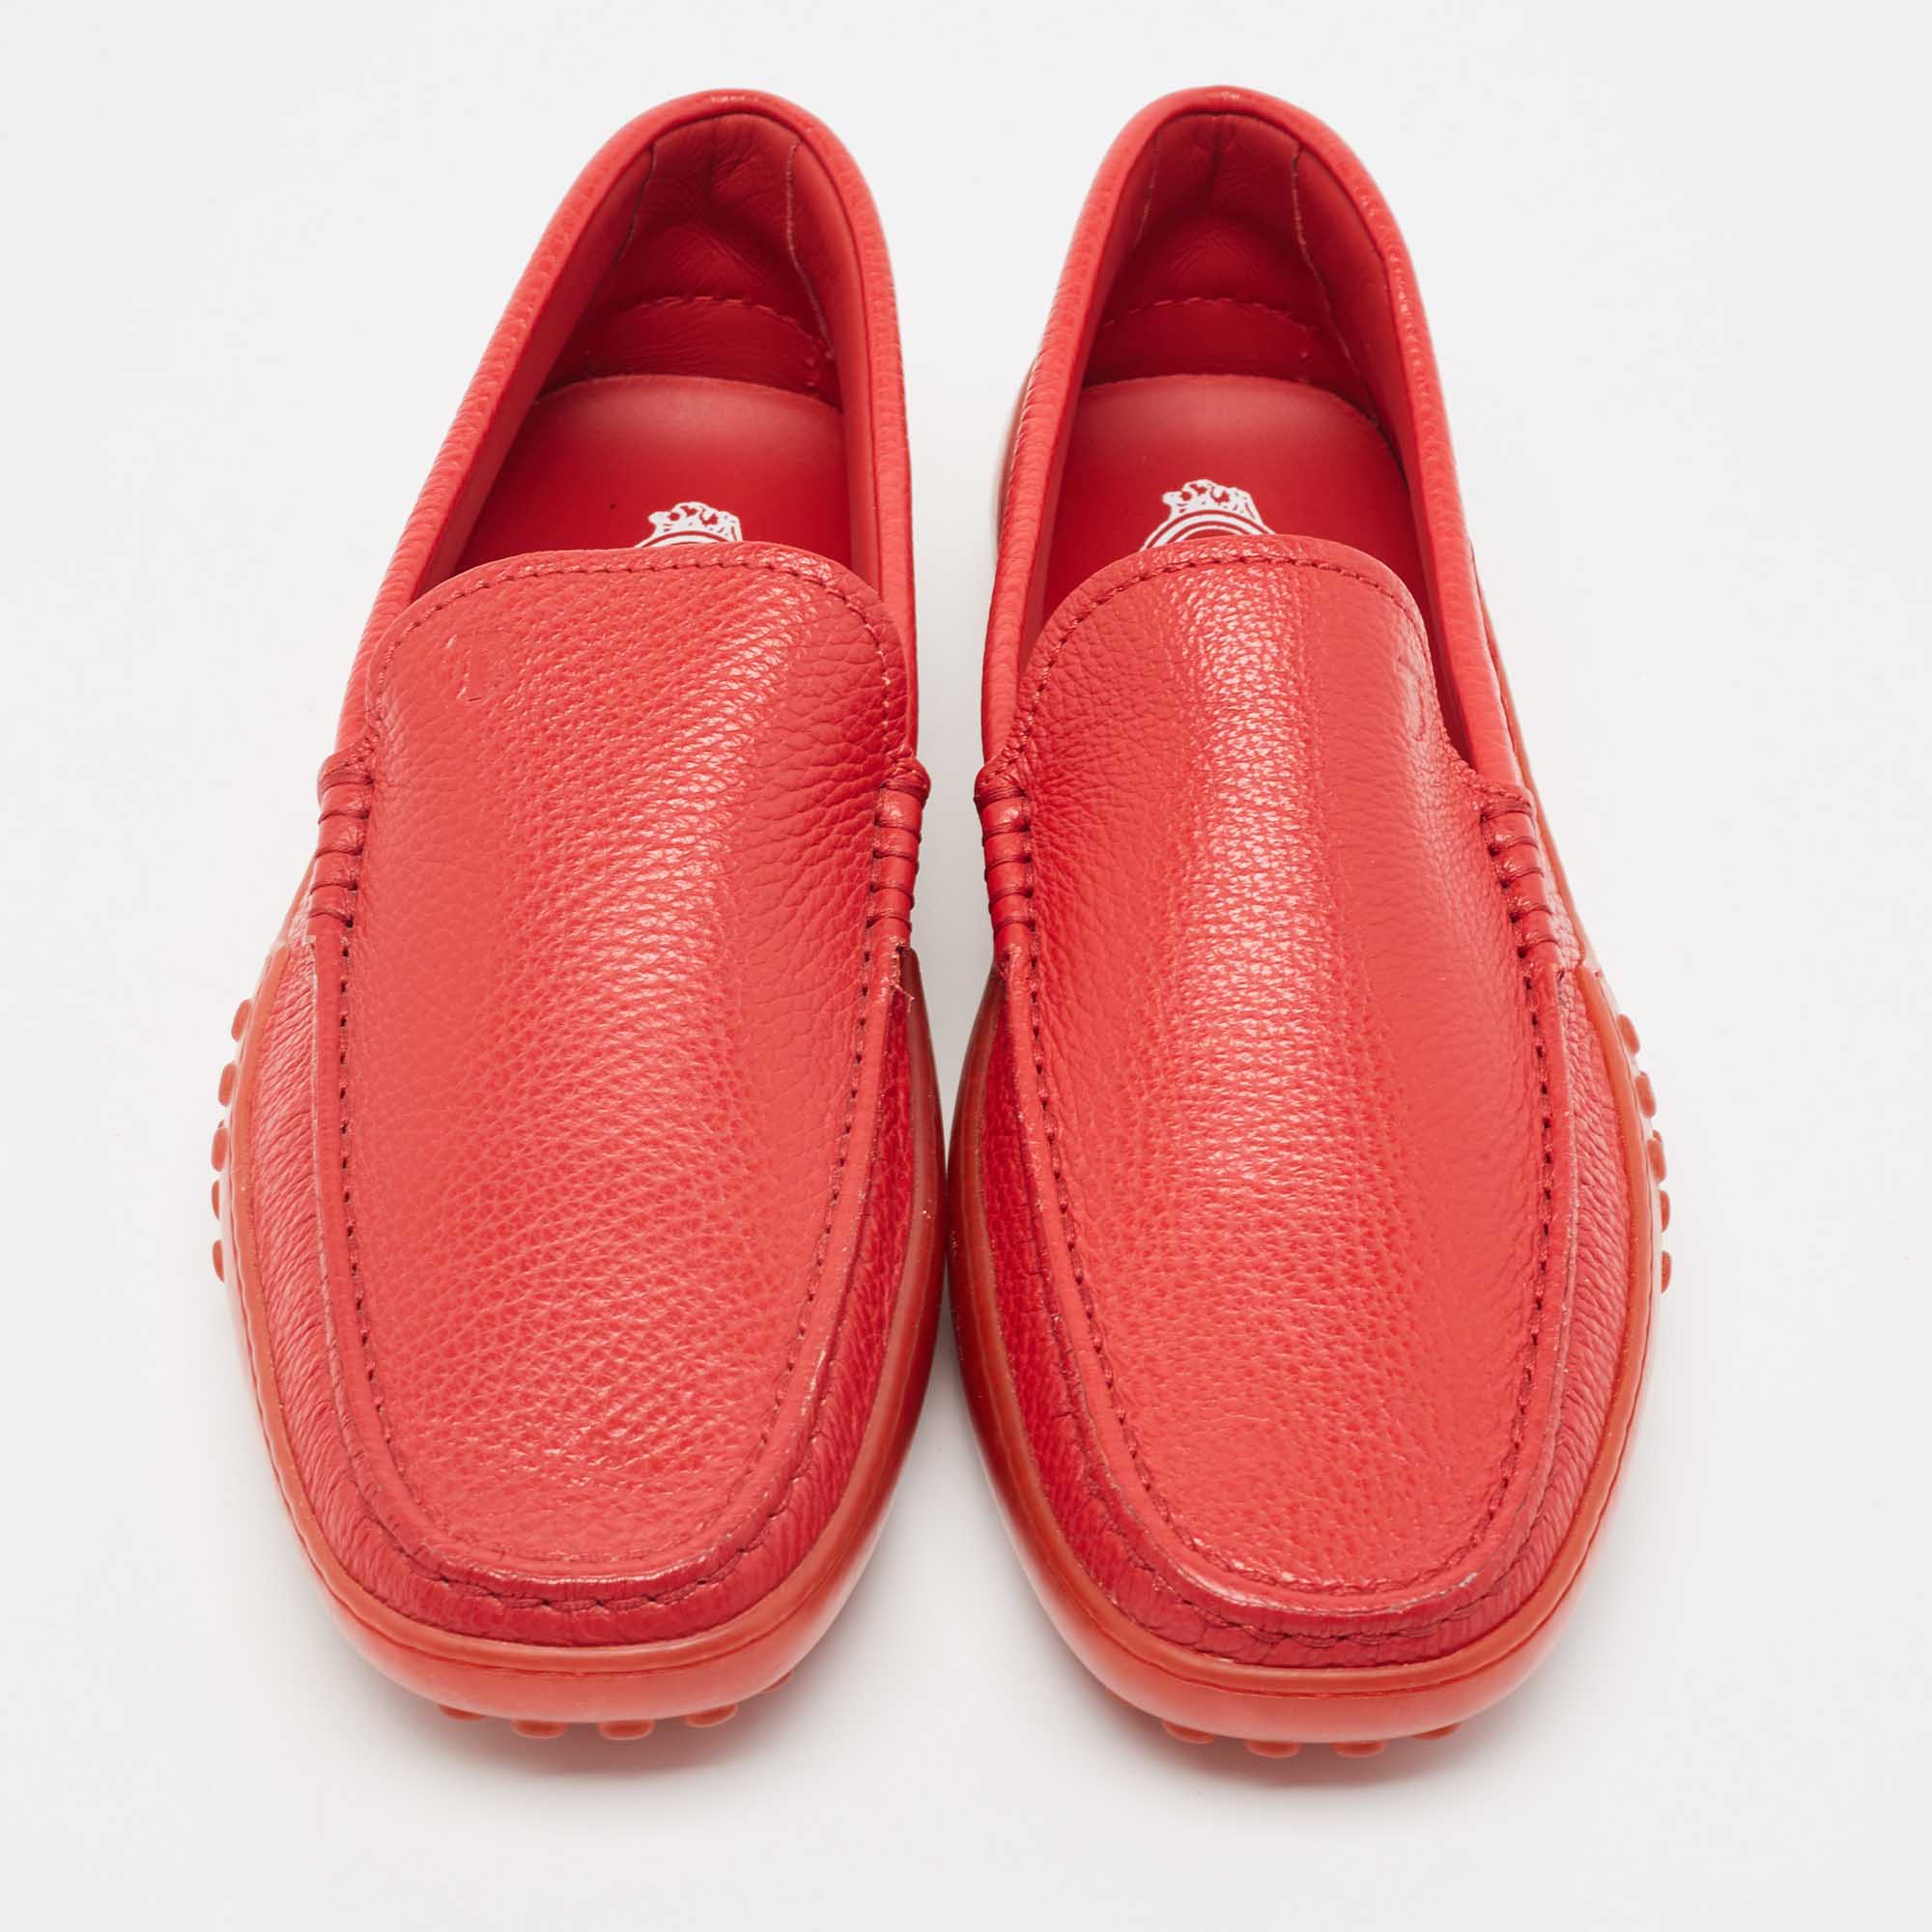 Tod's Red Leather Slip On Loafers Size 41